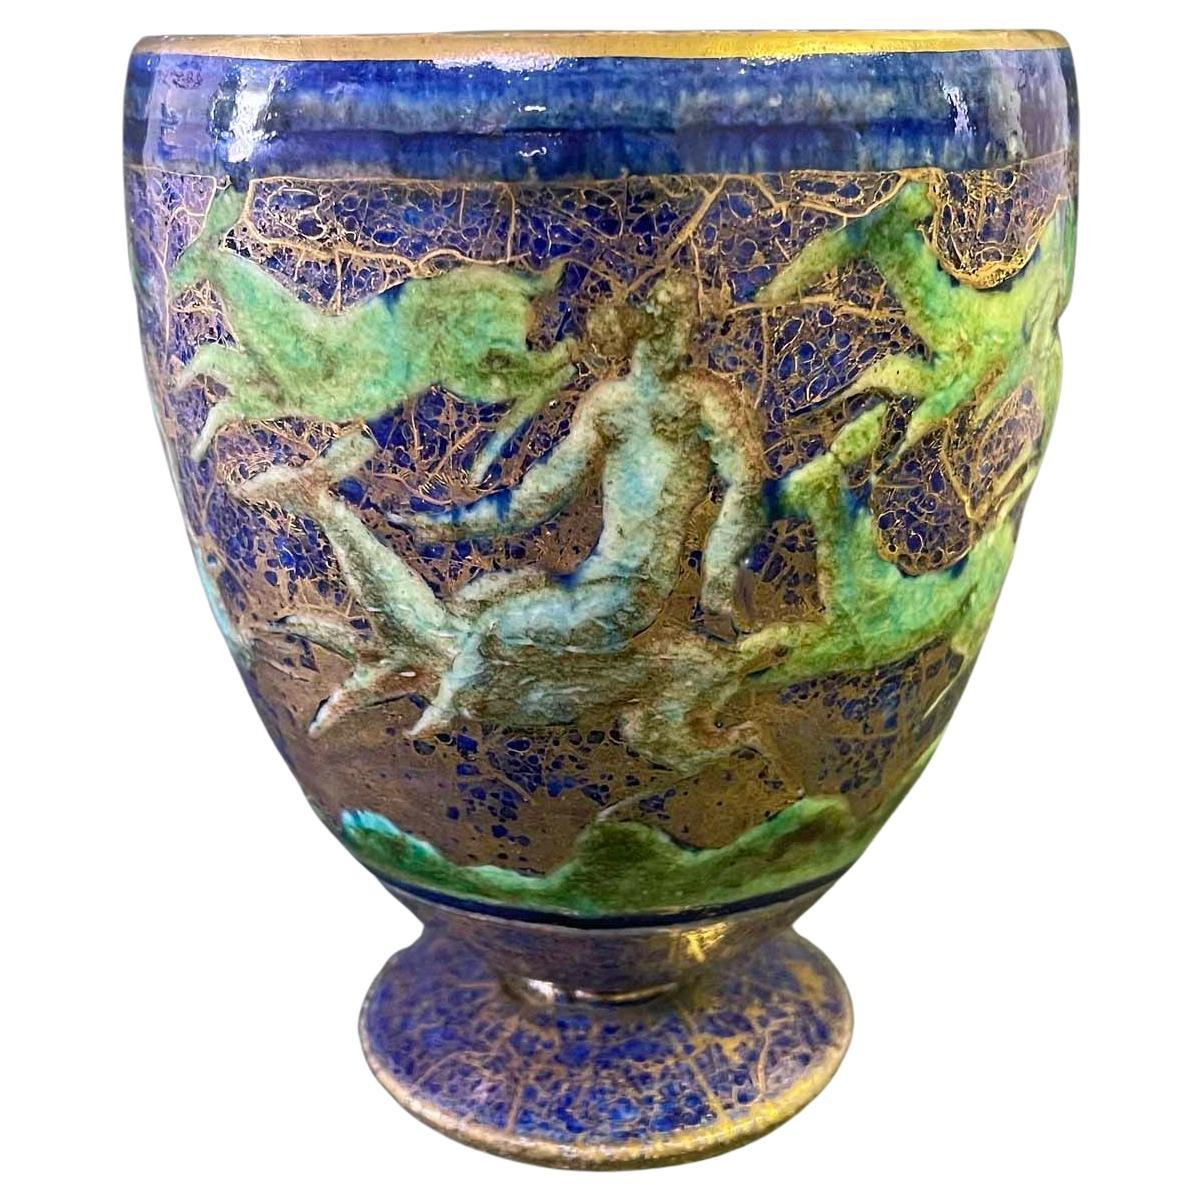 "Nudes Riding Deer", Superb Art Deco Vase by Mayodon in Blue, Green and Gold For Sale